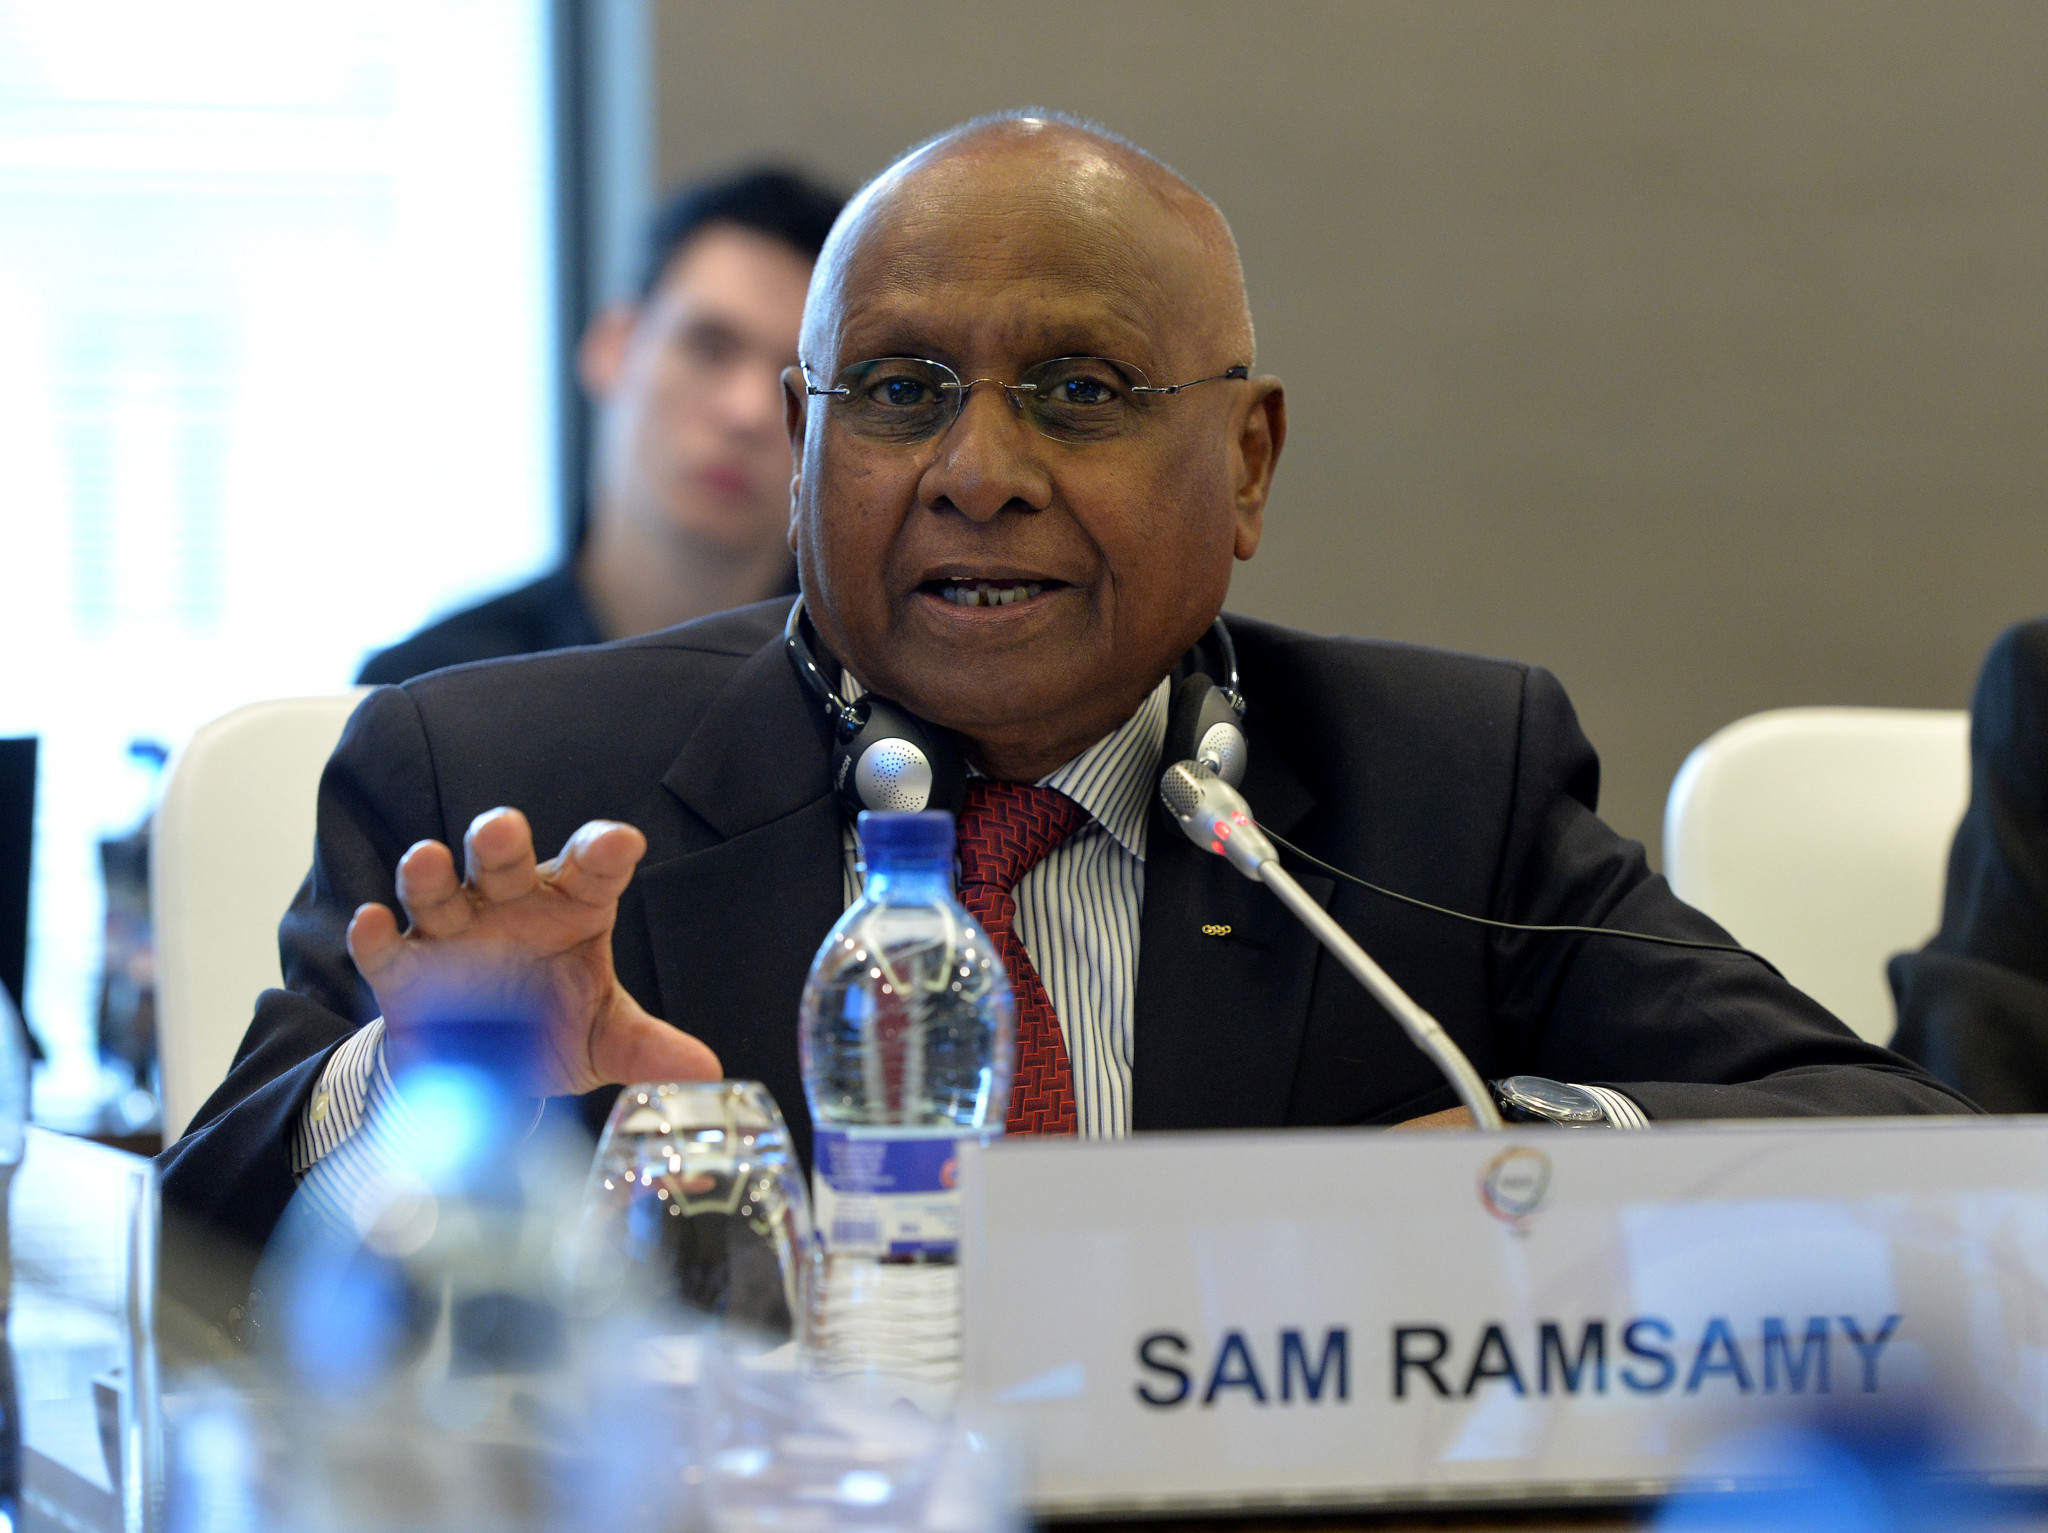 Sam Ramsamy has been tasked with overseeing elections at the troubled organisation ©Getty Images